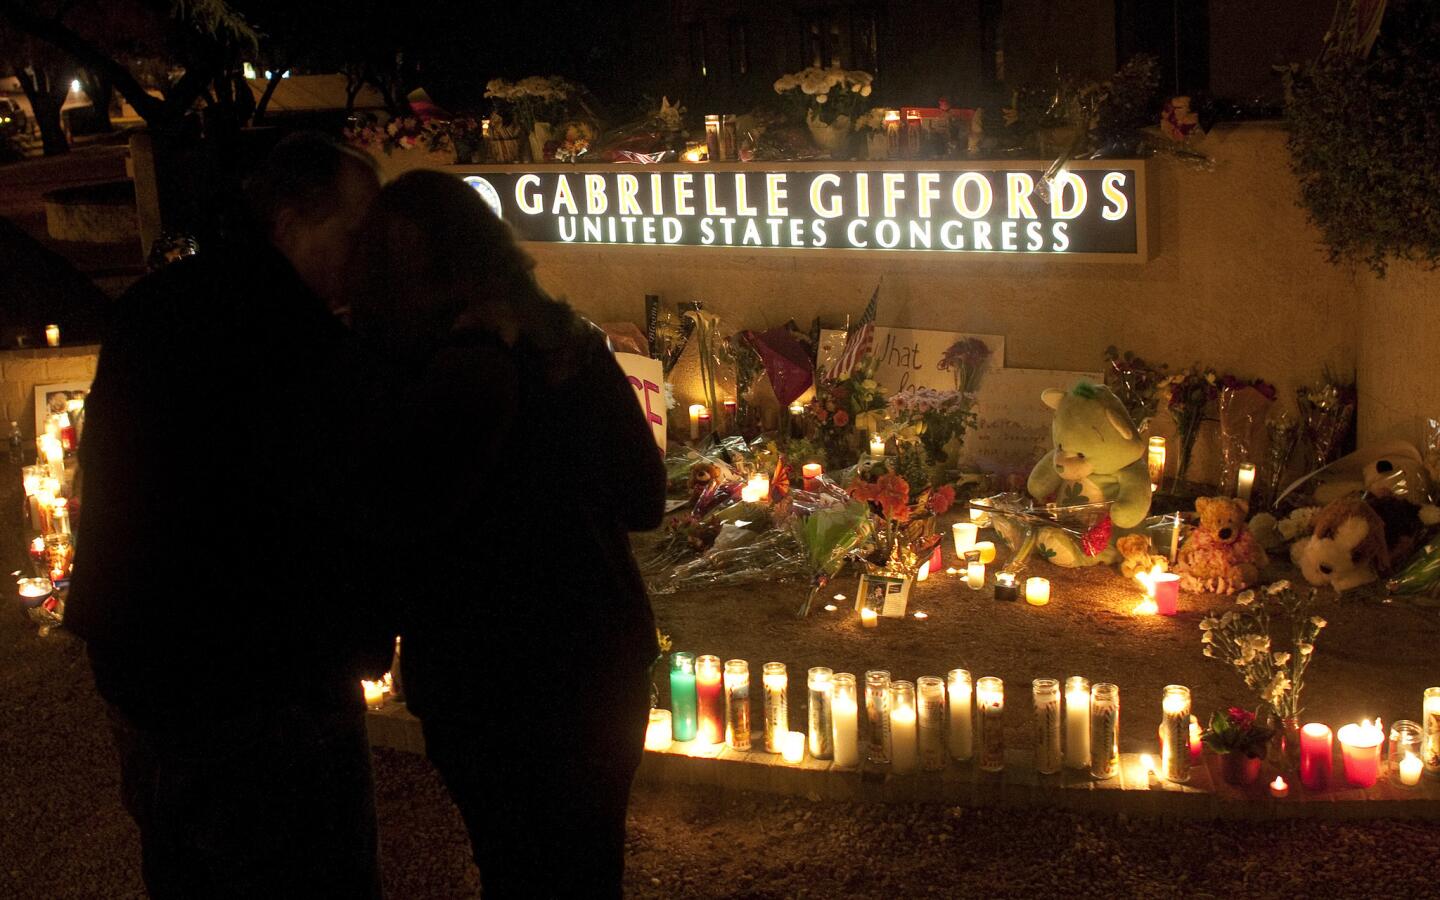 Well-wishers have created a makeshift memorial in front of Rep. Gabrielle Giffords (D-Ariz.) office. Giffords, who was beginning her third term in Congress, was shot in the head while meeting constituents at an event on Jan 8.